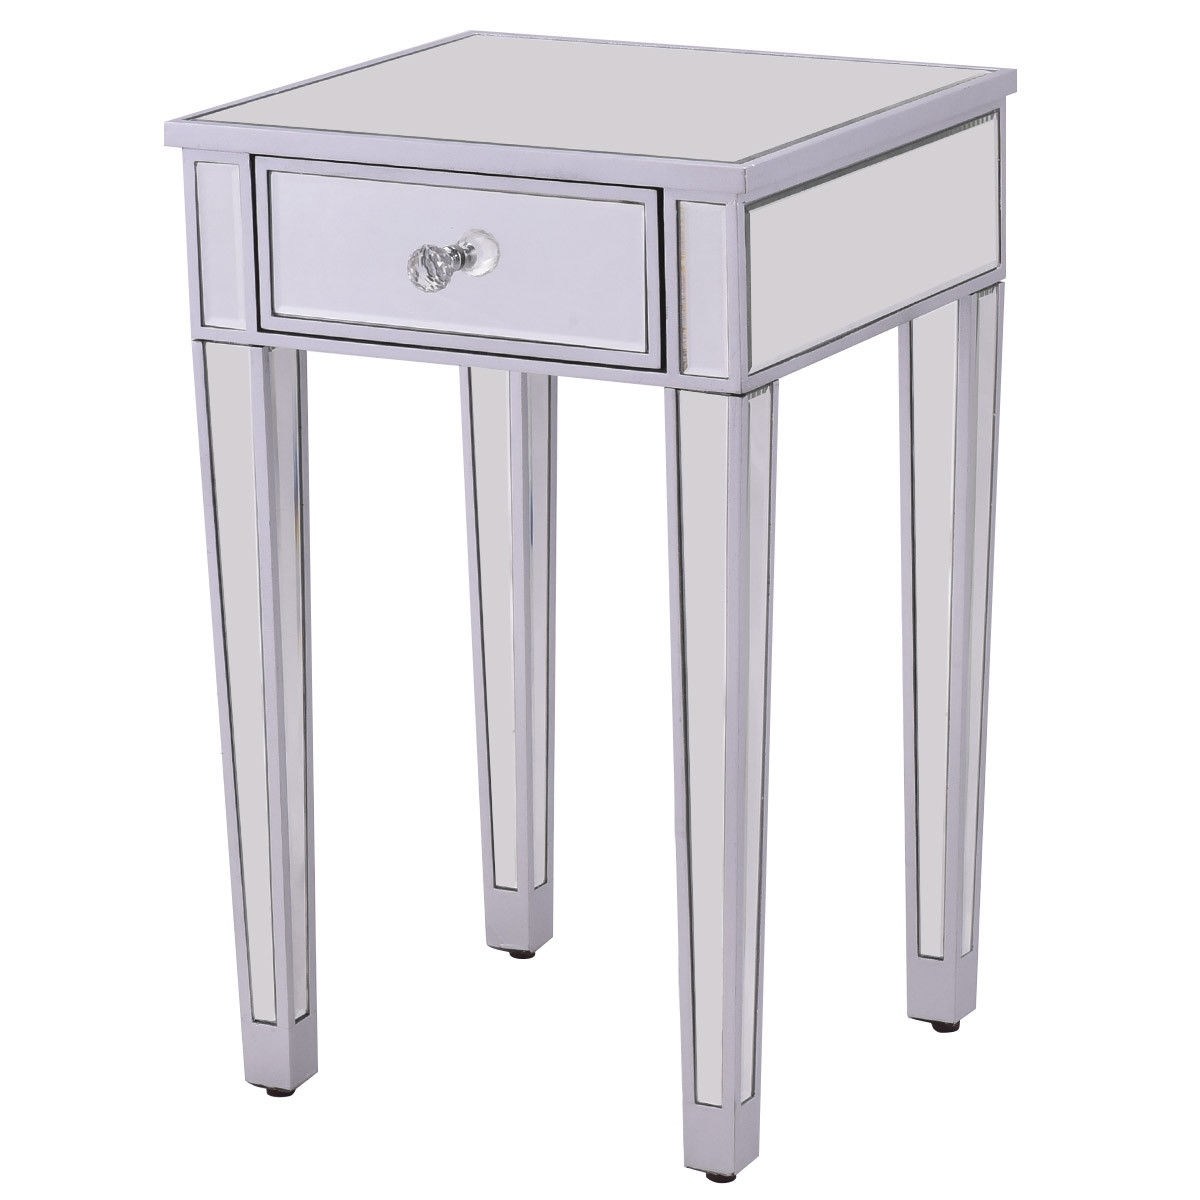 way mirrored accent table nightstand end bedside storage cabinet drawer sliver free shipping today easy christmas runner patterns barn door designs backyard gazebo mosaic outdoor